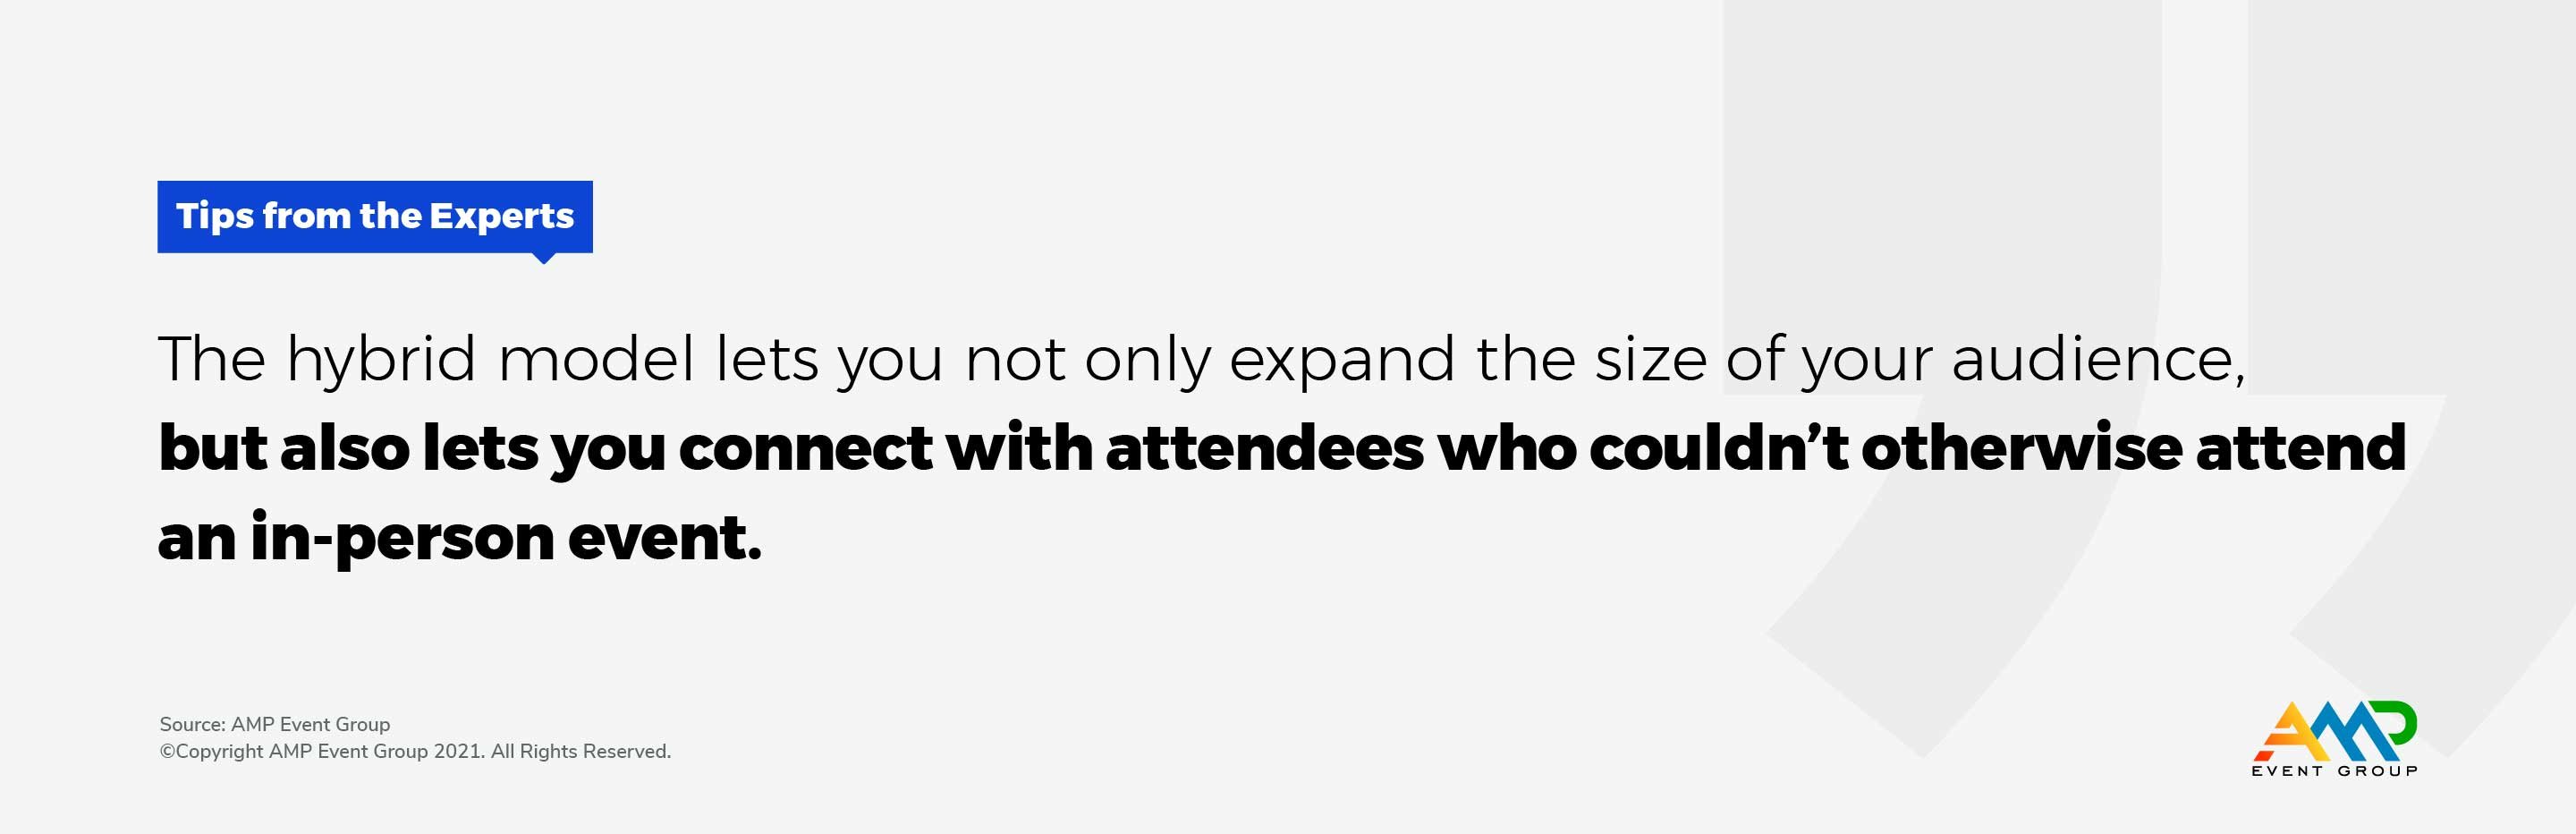 AMP Events: Hybrid Events Make Cents - connect with attendees who otherwise attend an in-person events 